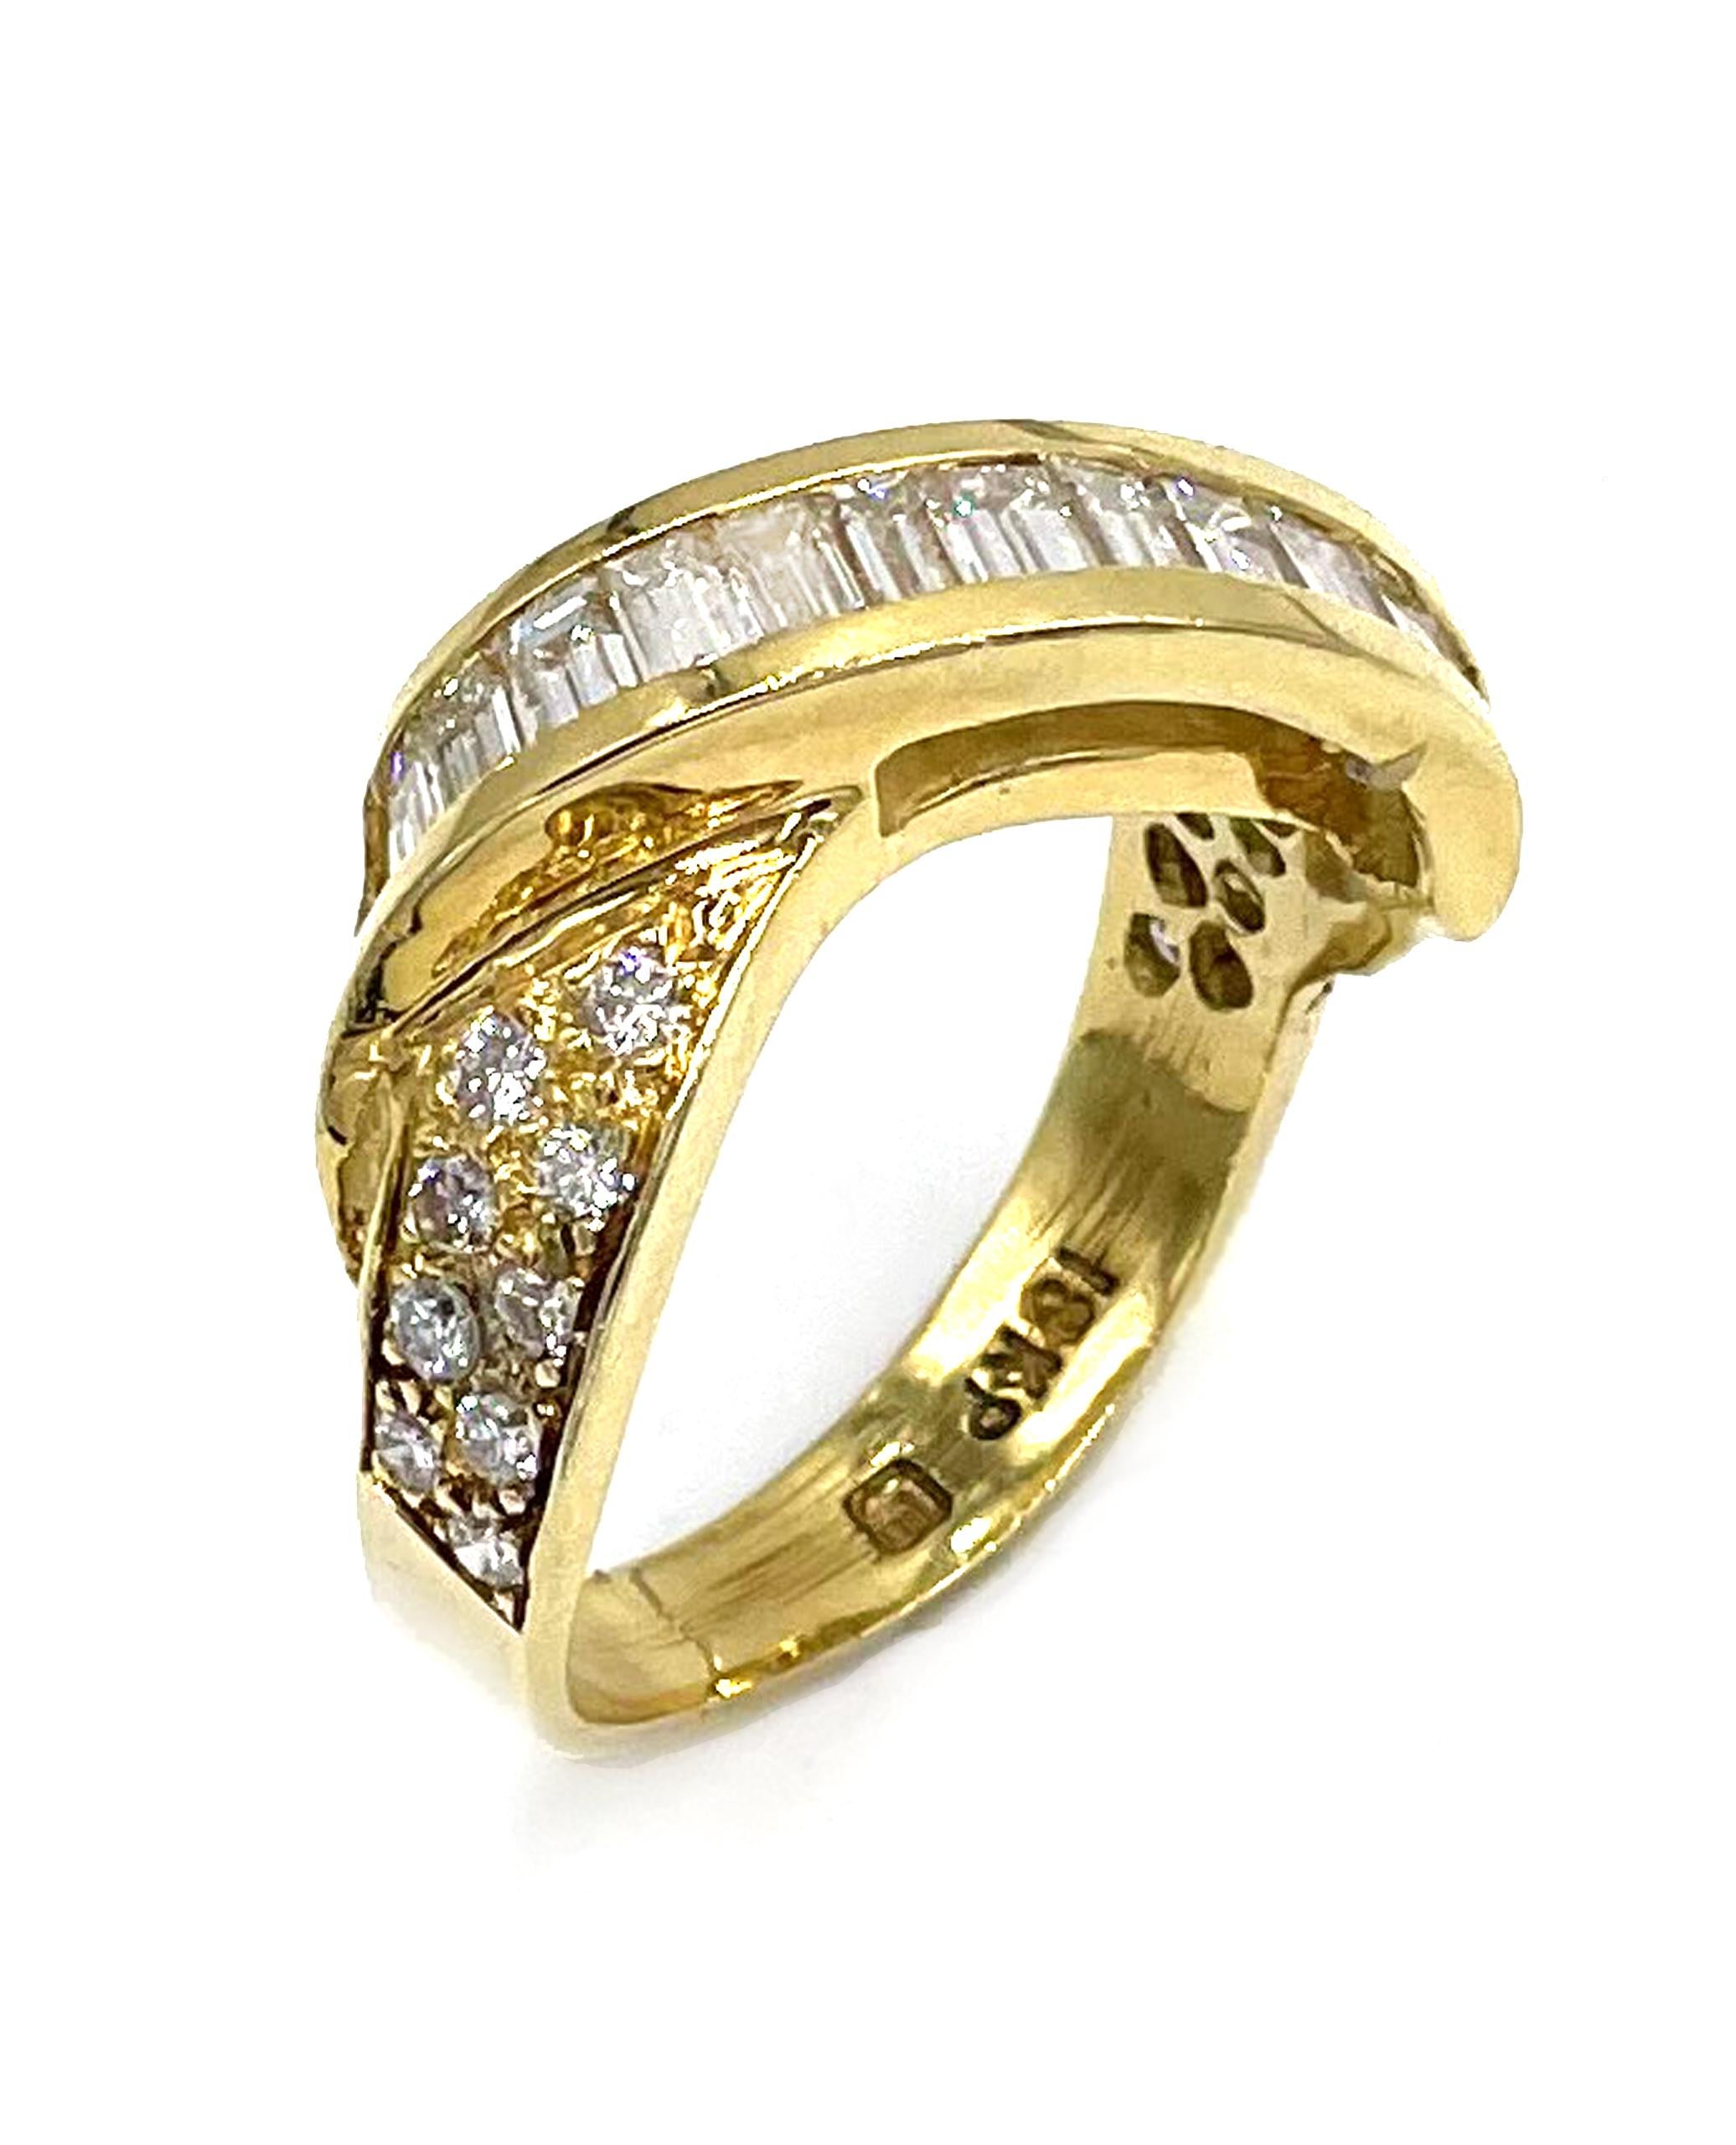 Vintage 18K yellow gold ring with 14 baguette diamonds and 18 round diamonds, all totaling 1.28 carats. G/H color, VS clarity. (Created circa 1985)

-Finger size: 6.25